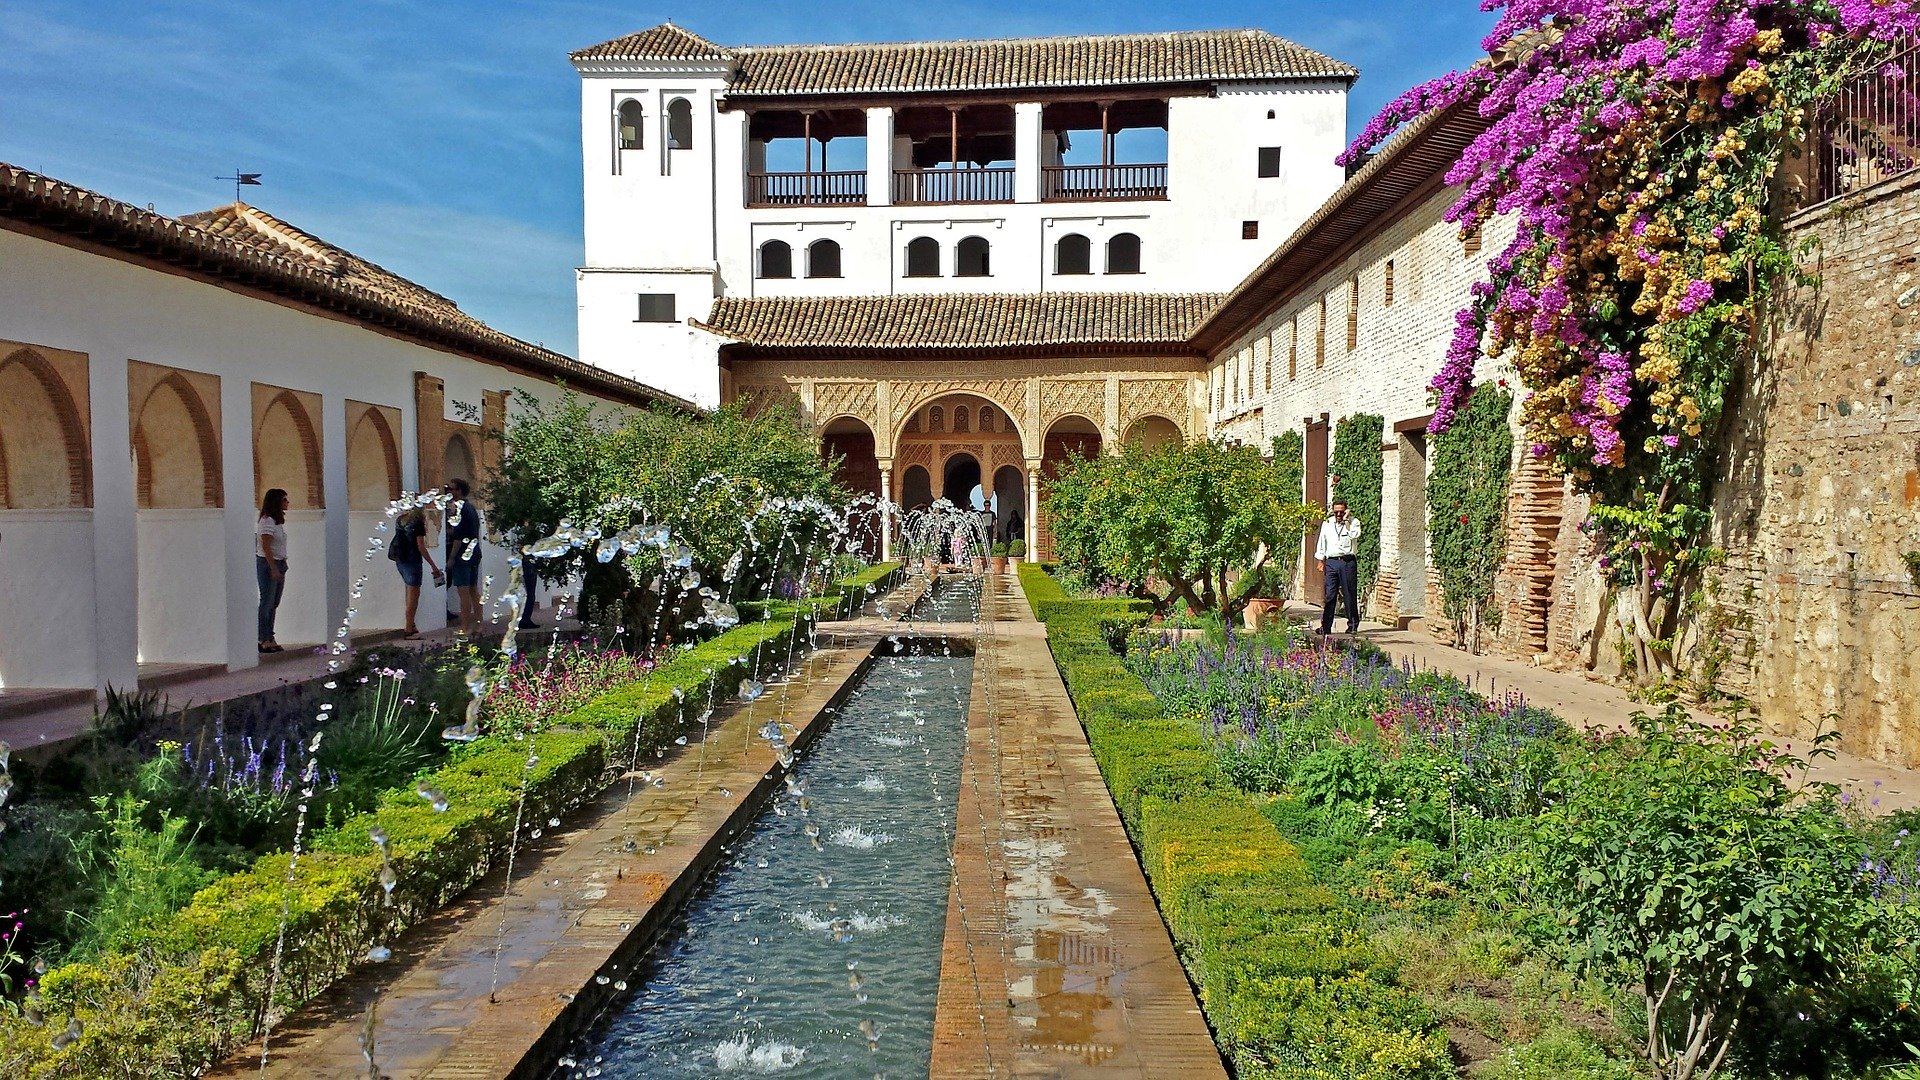 The Patio of the Irrigation Ditch in the Generalife gardens, Alhambra